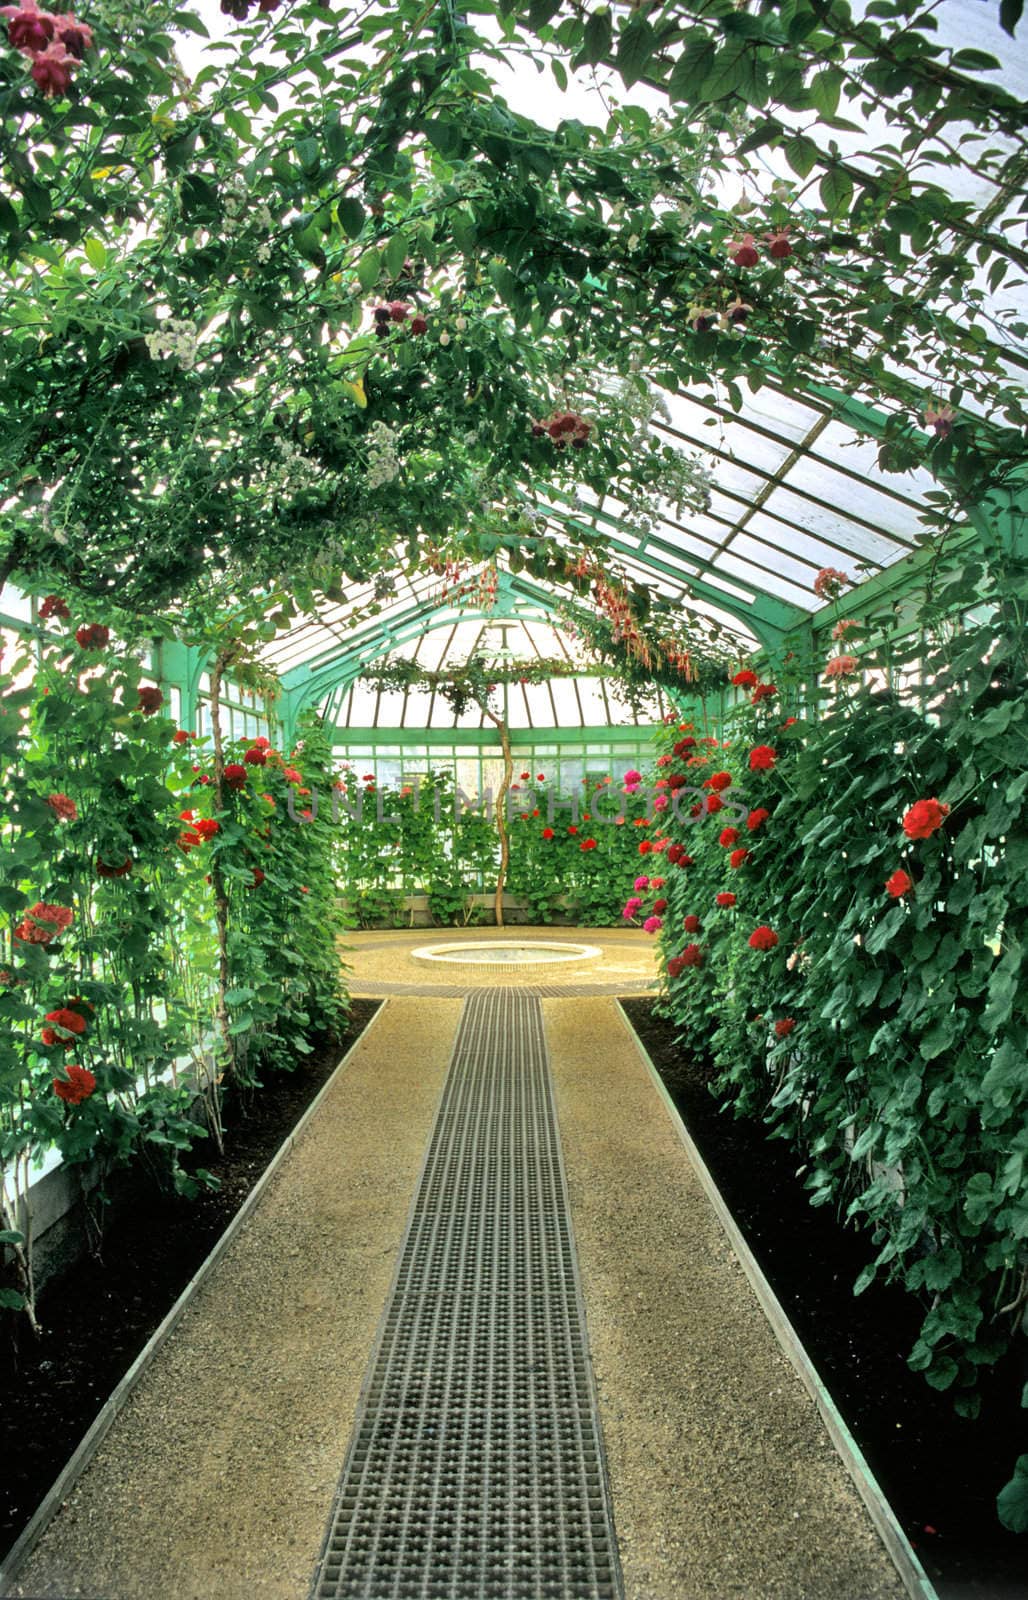 Greenhouse interior by ACMPhoto